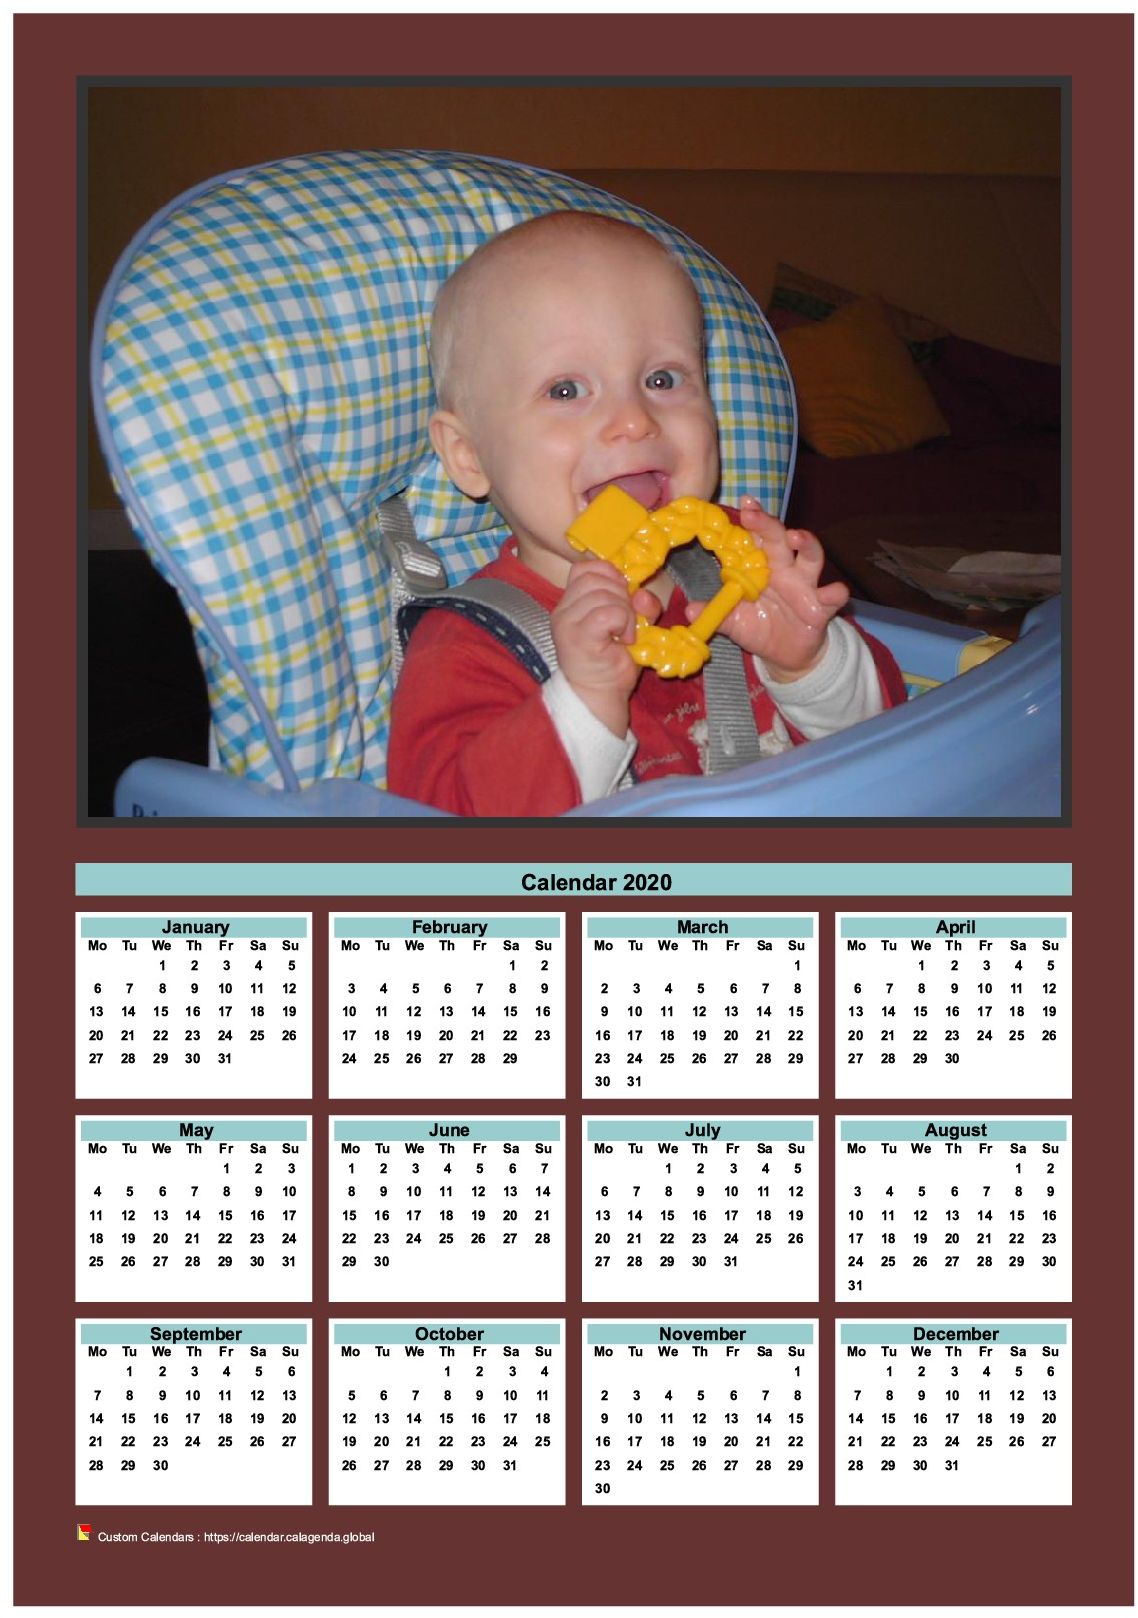 Calendar 2020 annual to print with family photo